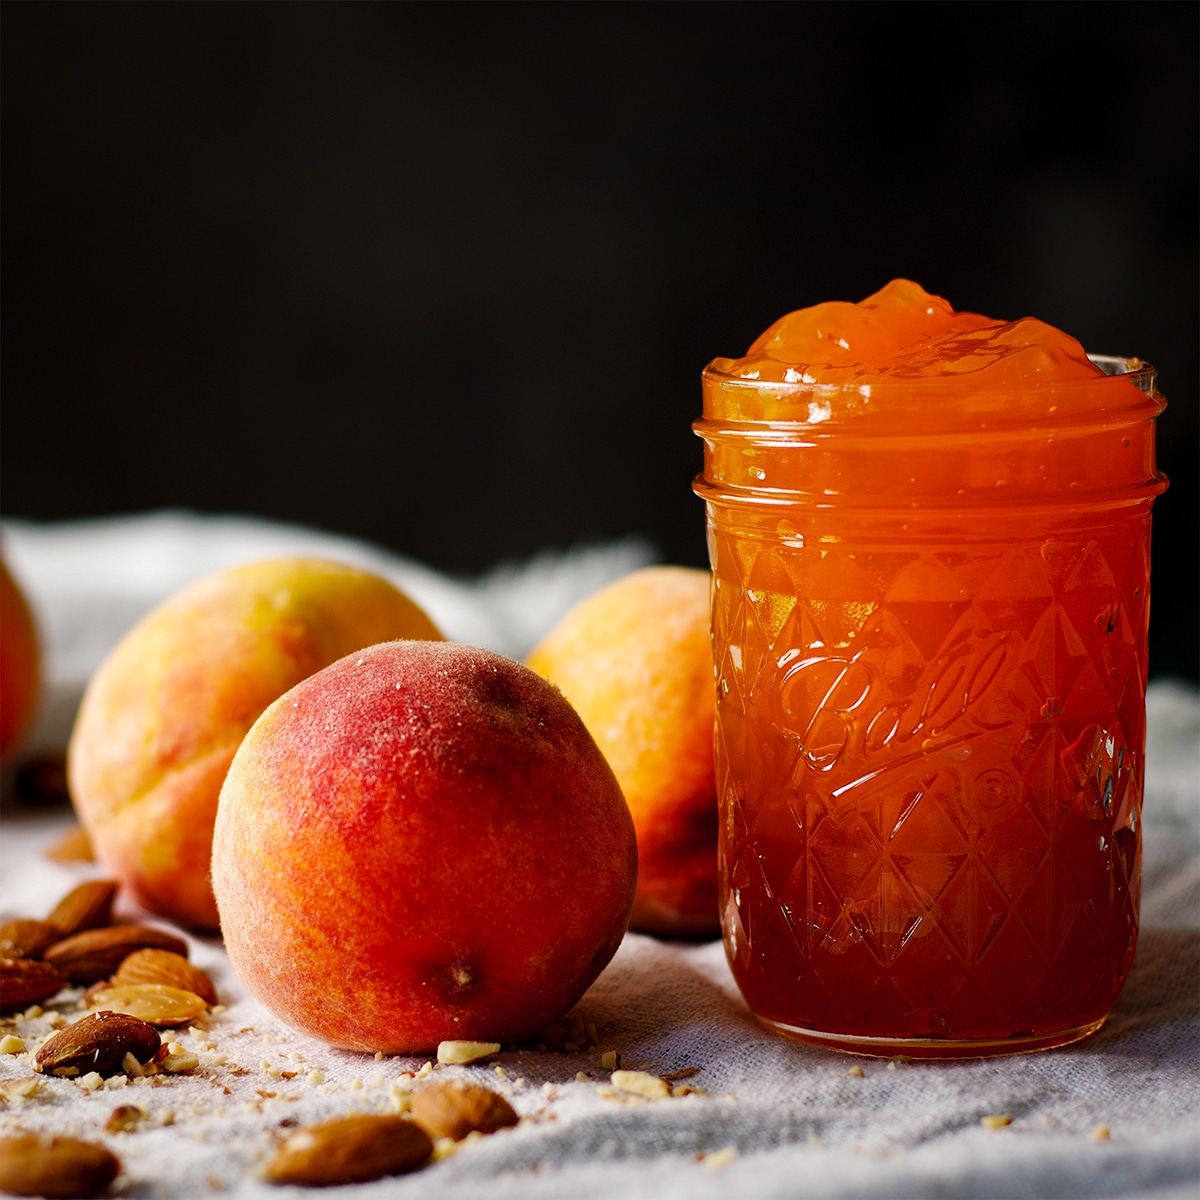 A jar of homemade peach preserves on a table next to fresh peaches and roasted almonds.